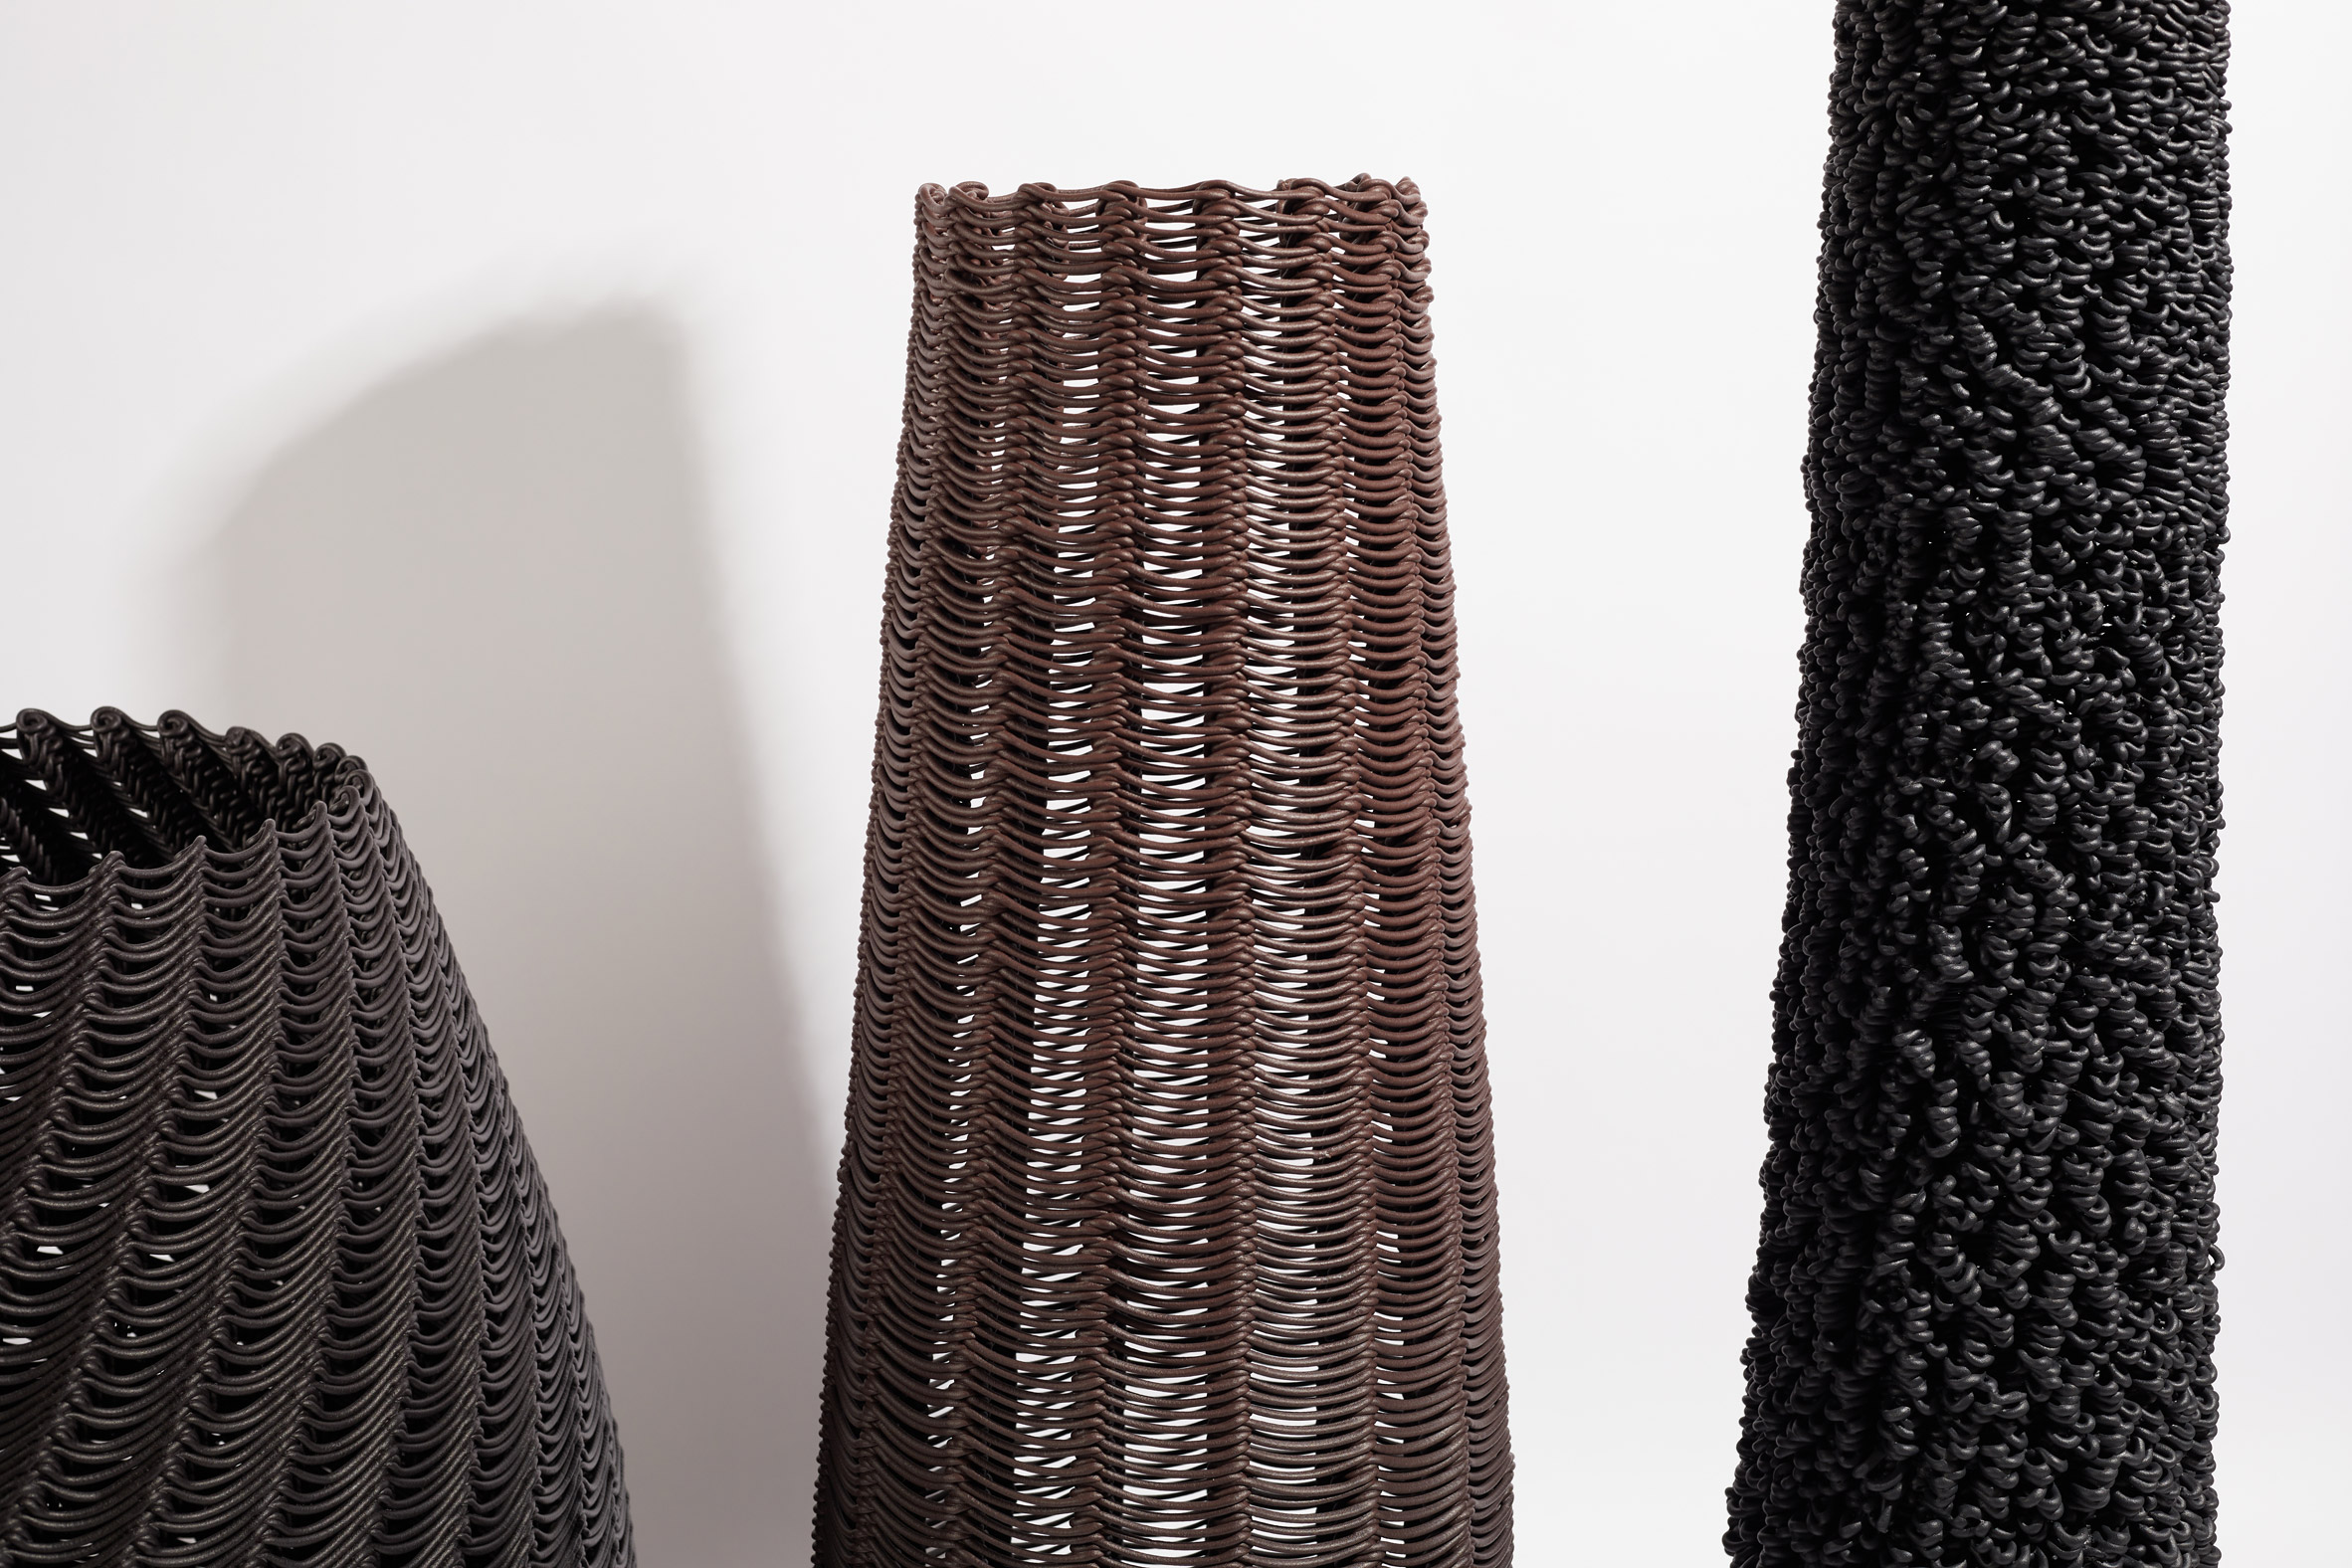 Photo of the forms in the Digitally Woven project in close-up showing basket-like woven structure in plastic